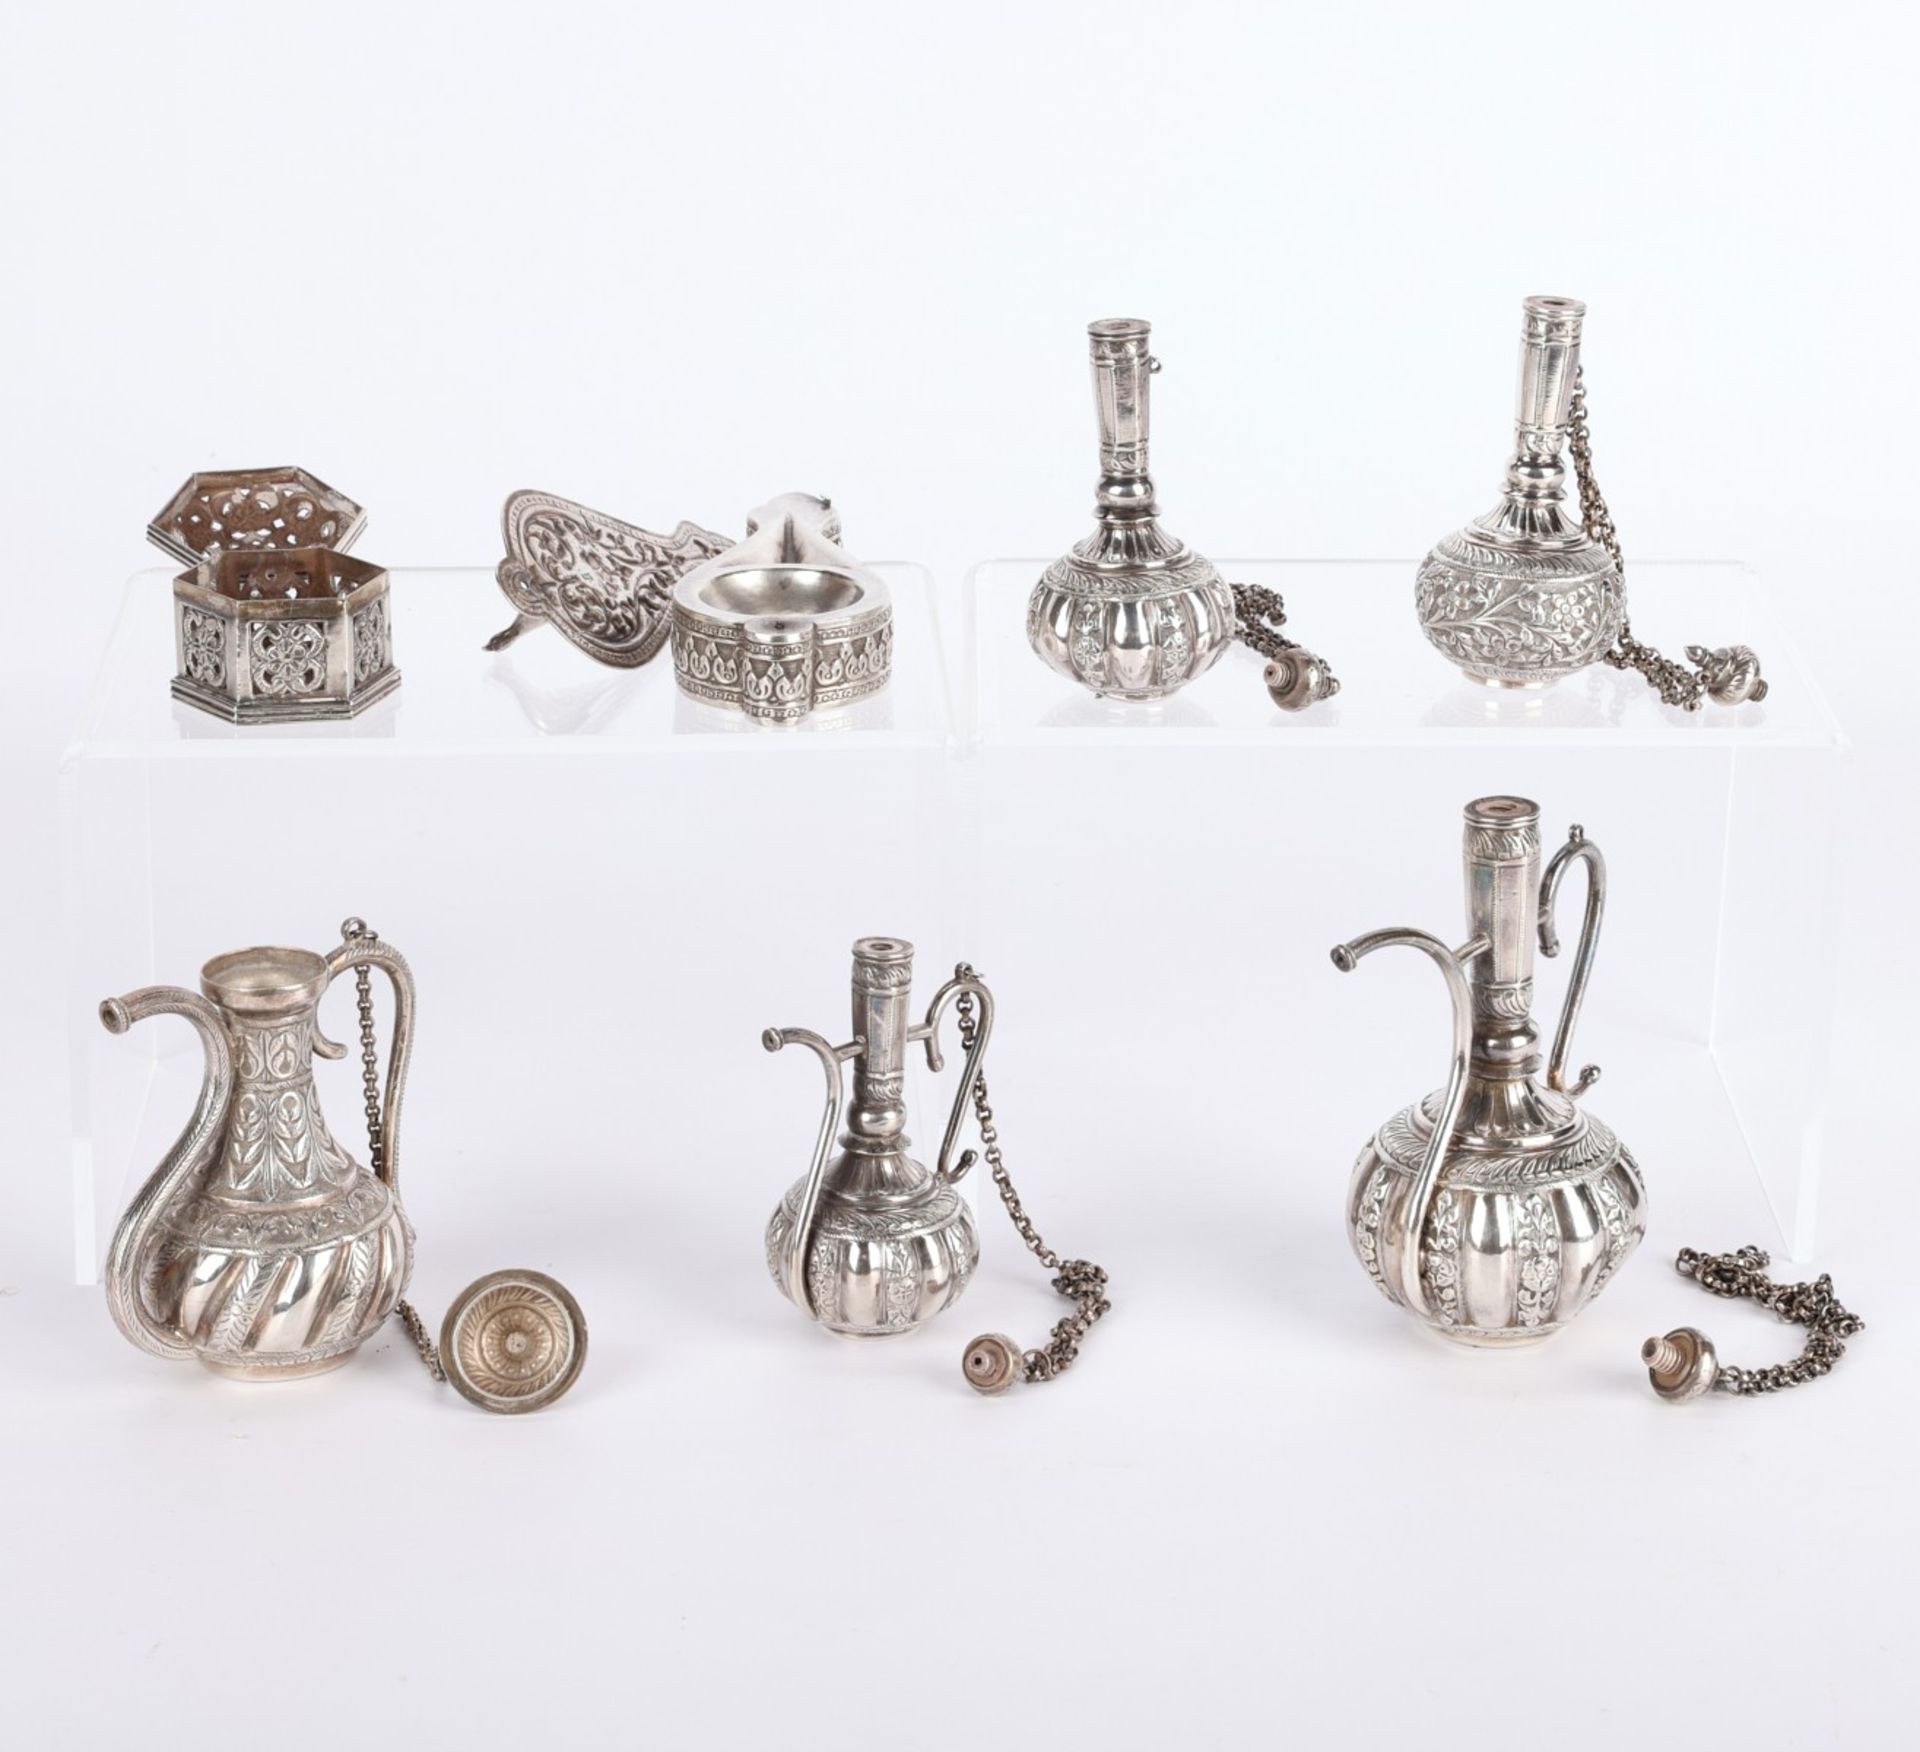 7 Miniature Silver and Sterling Indian Objects - Image 6 of 13